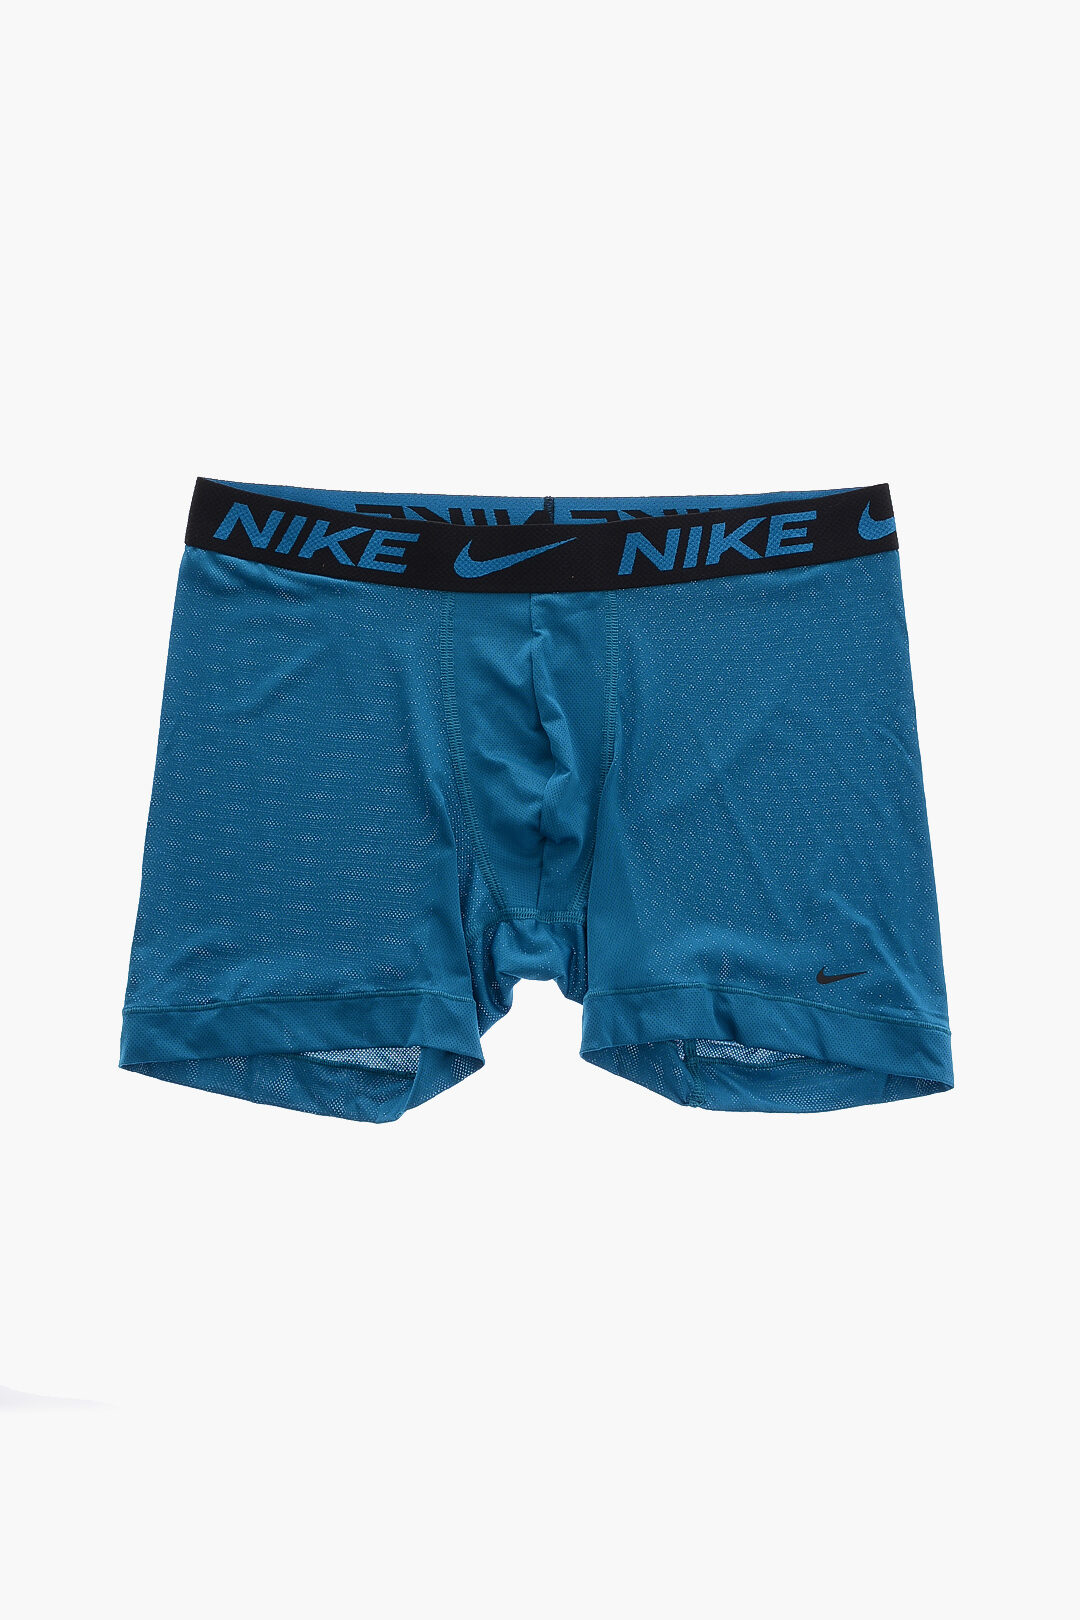 Nike Logoed at the Waist 3 Pairs of Boxers Set men - Glamood Outlet